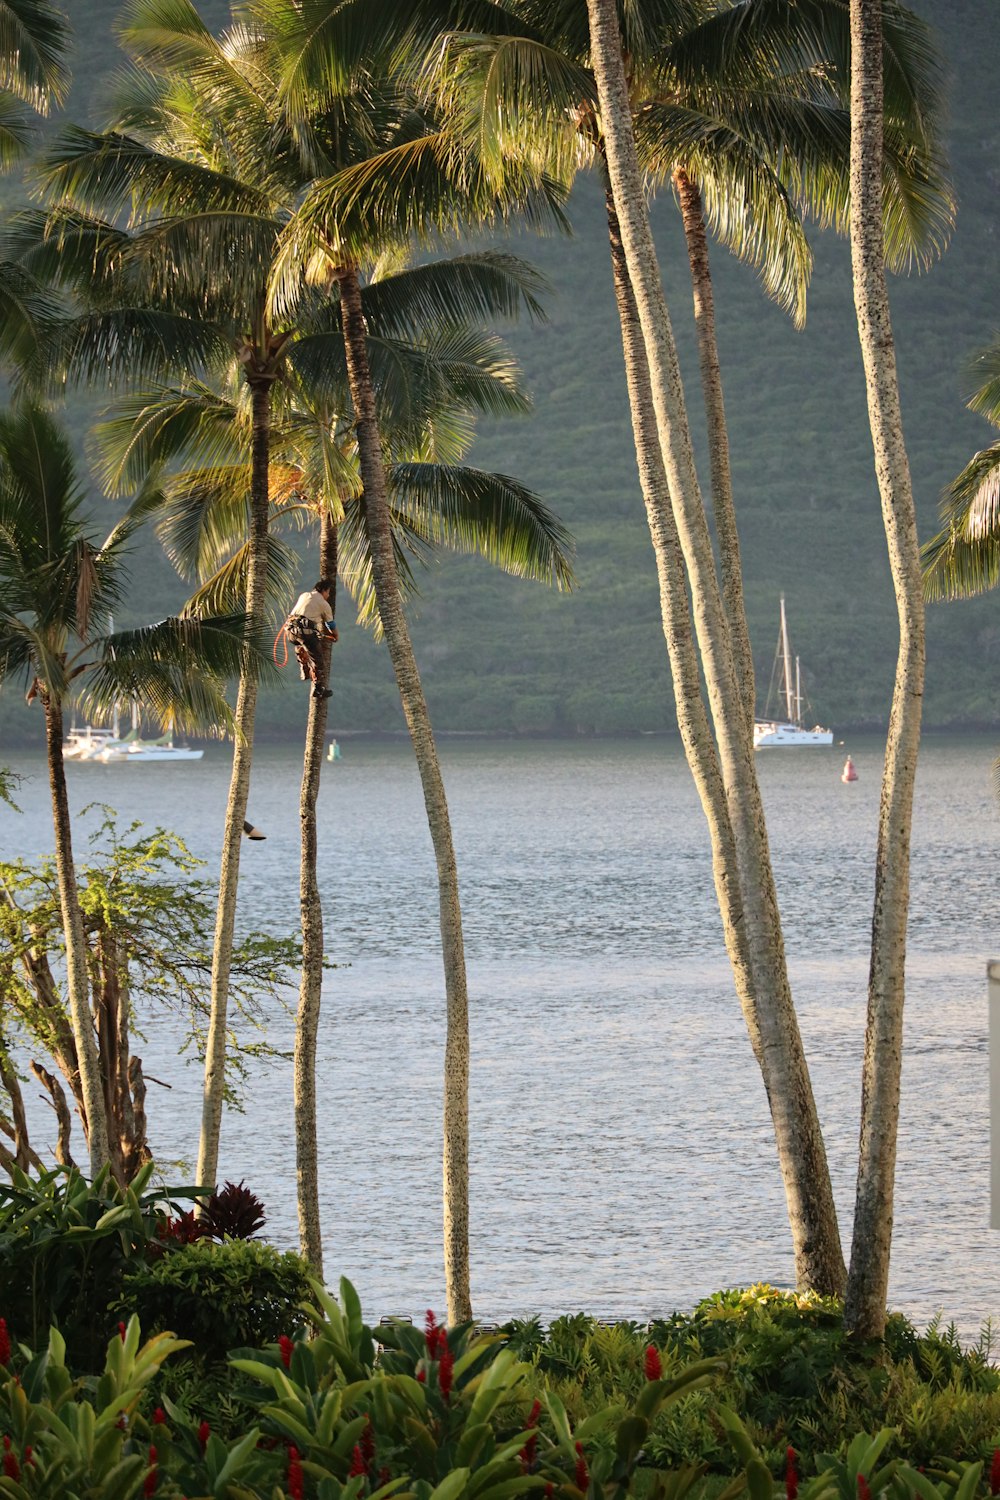 a view of a body of water surrounded by palm trees